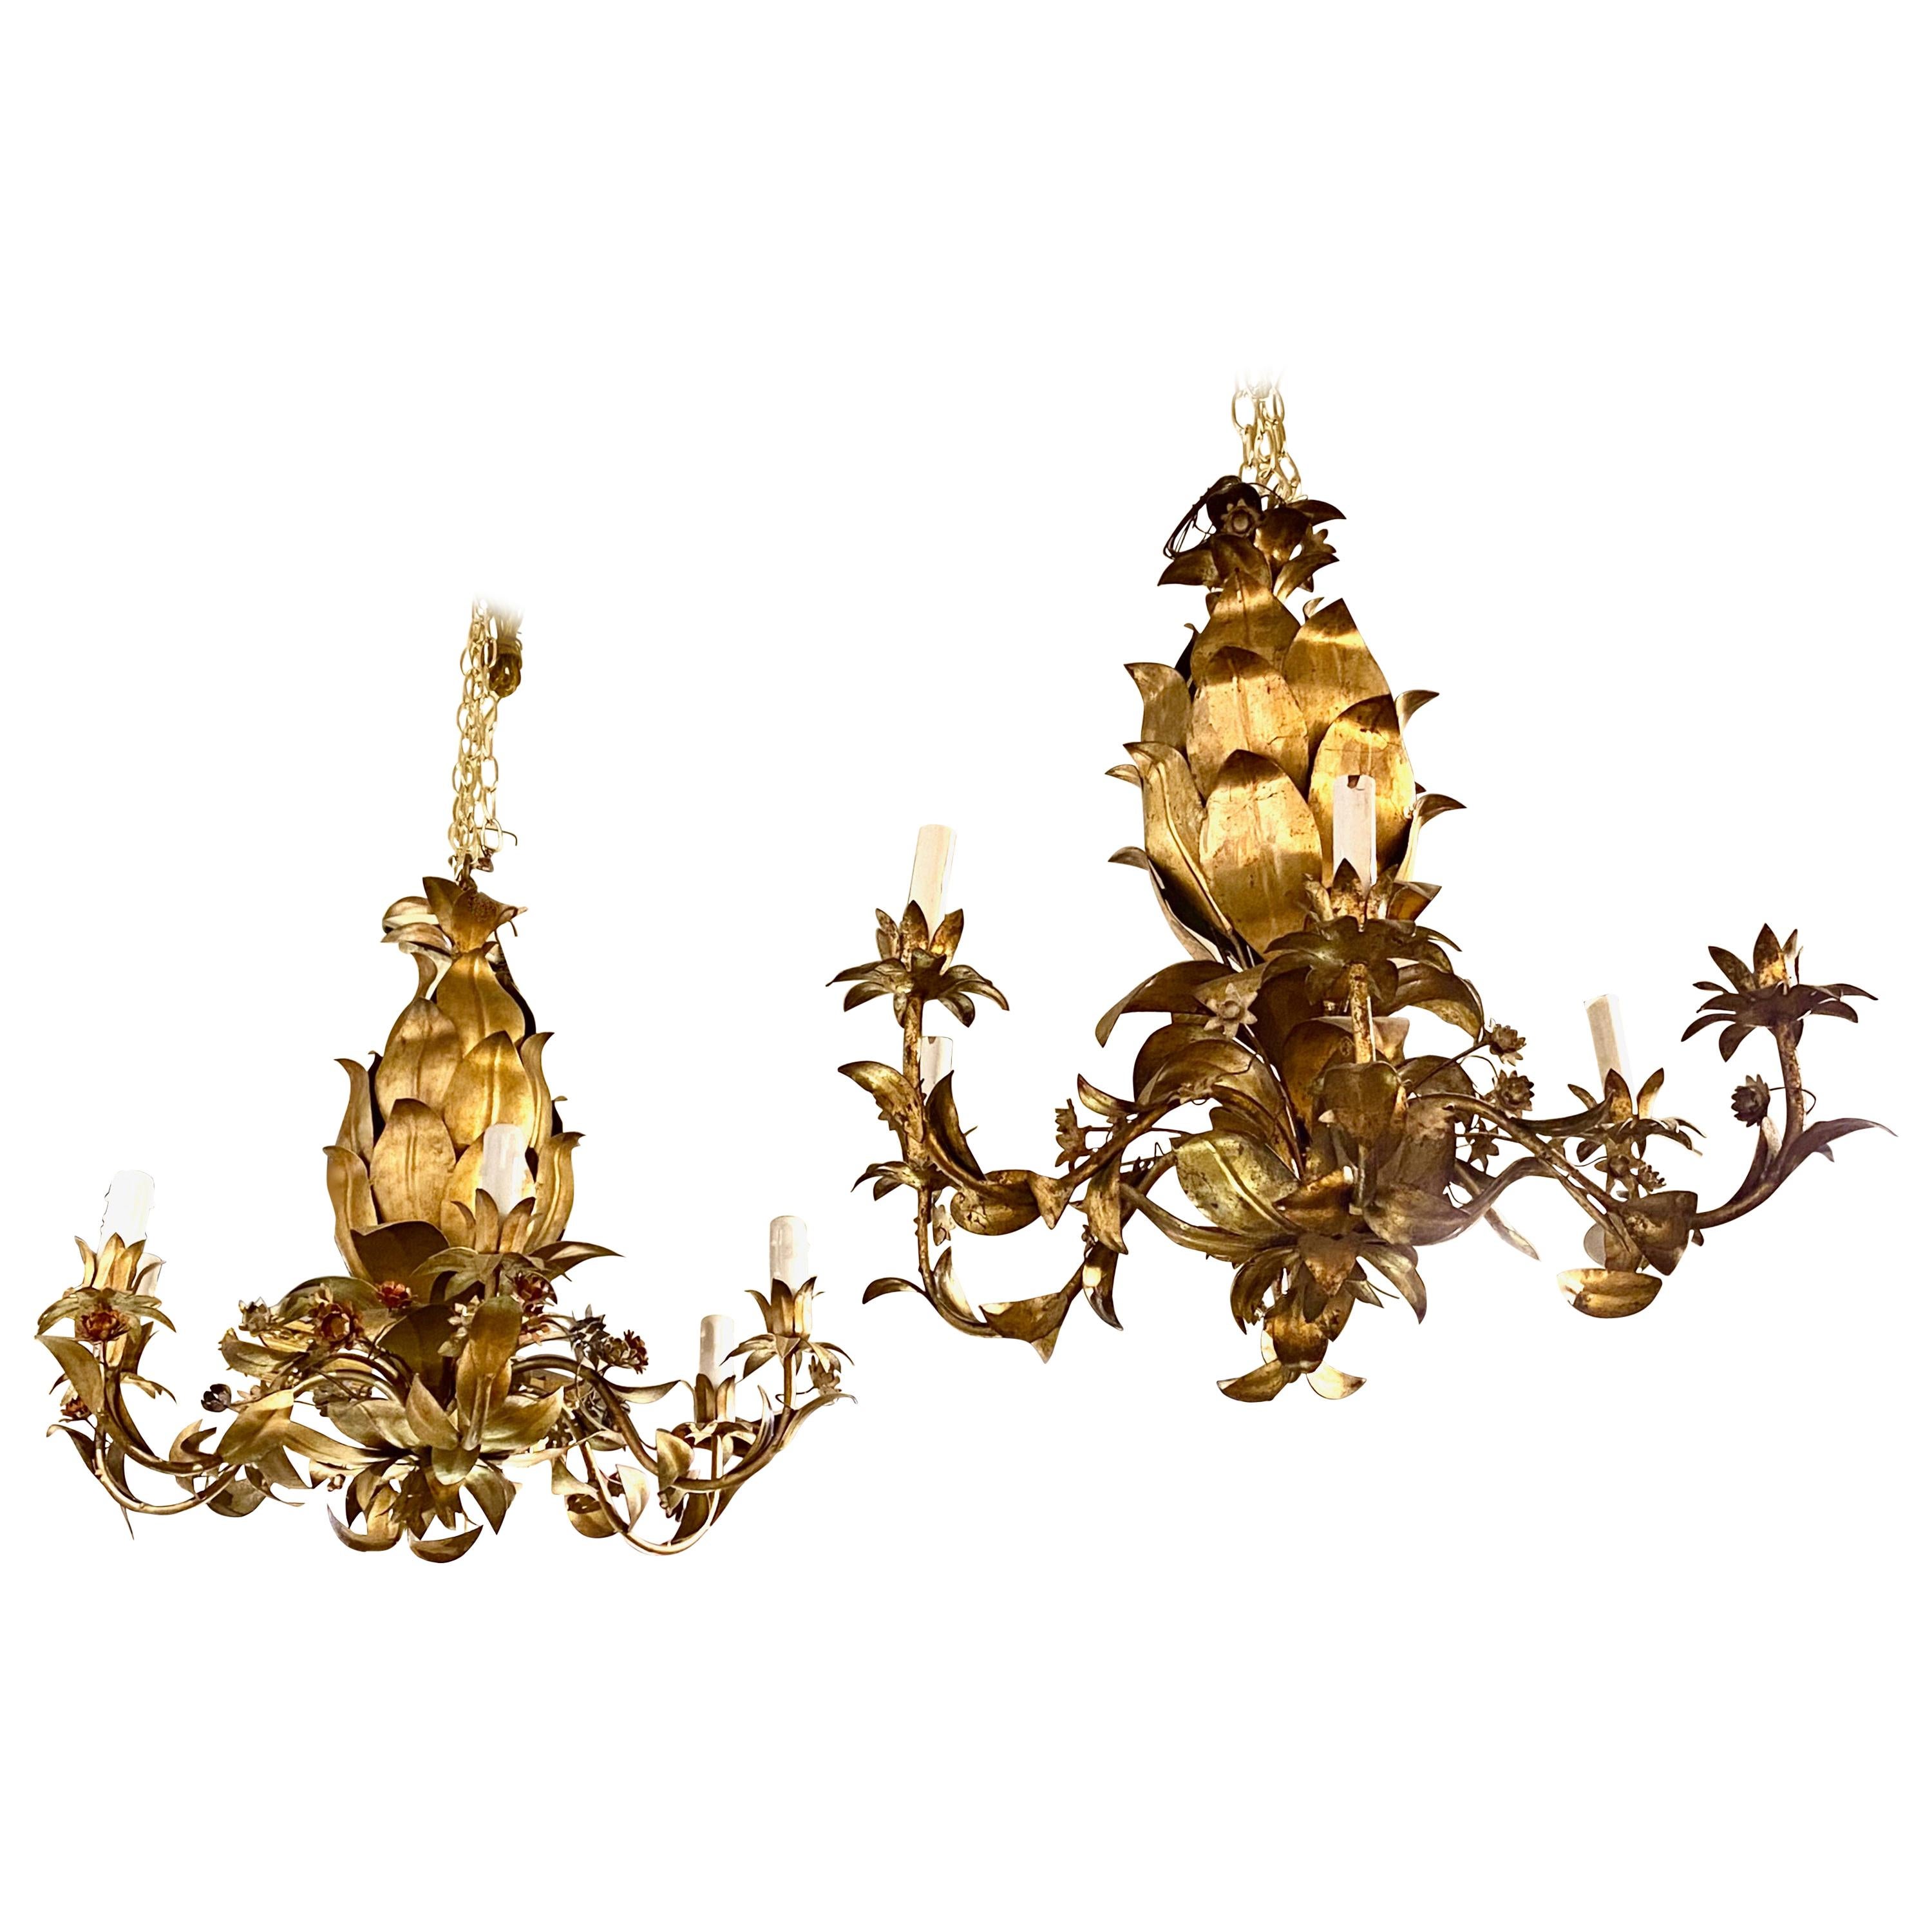 Italian Pineapple-Form Gilt Tole Chandeliers, 2 Available